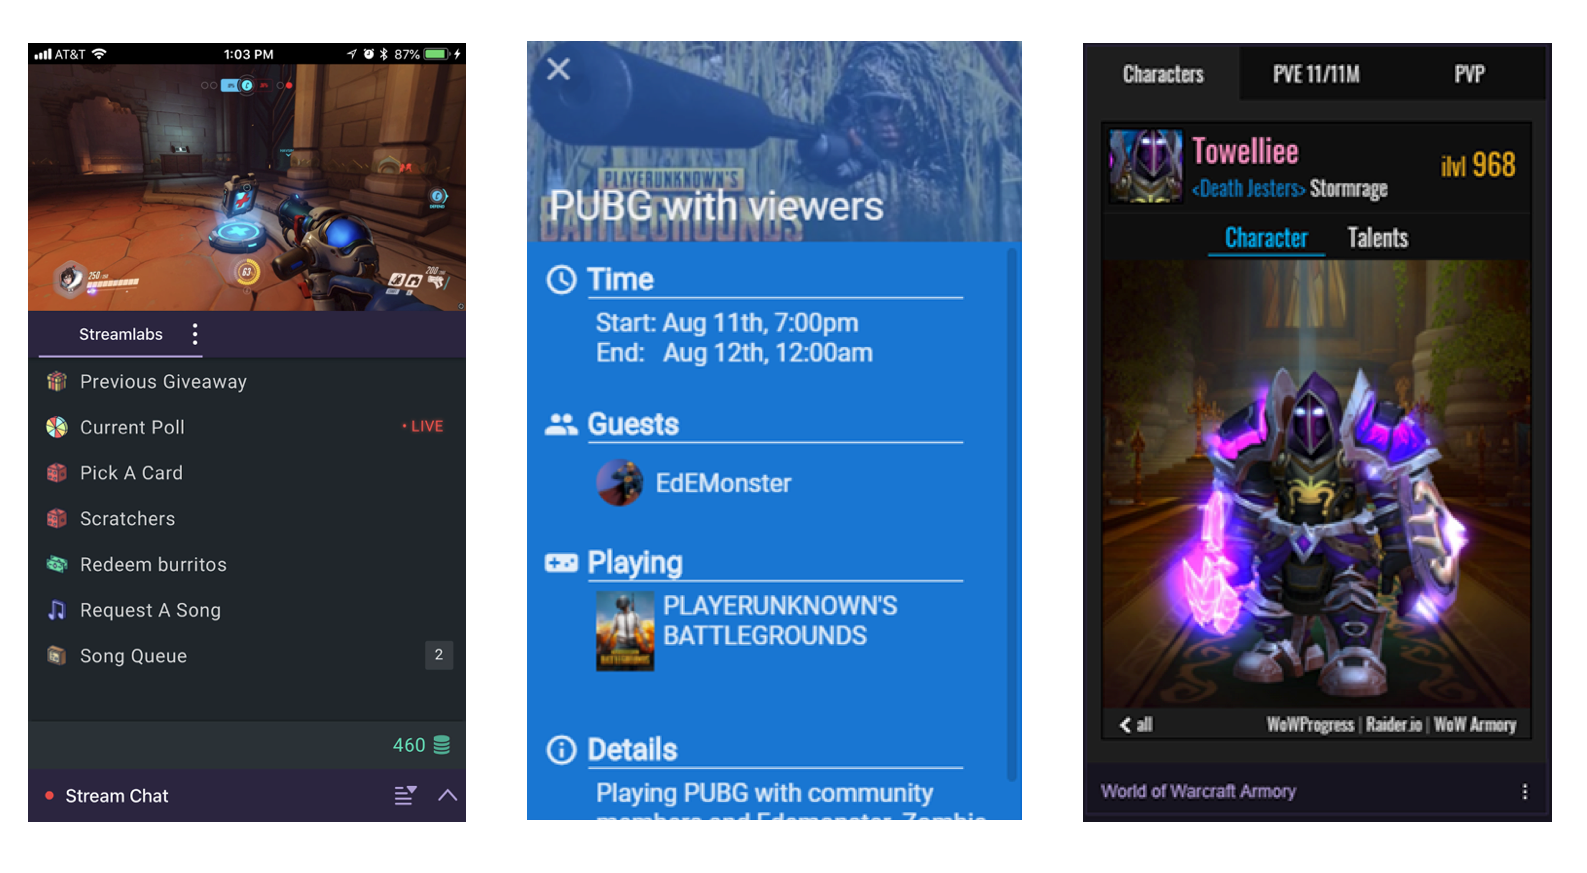 unlock your stream s full potential with extensions now on twitch mobile apps - how to stream fortnite mobile on twitch